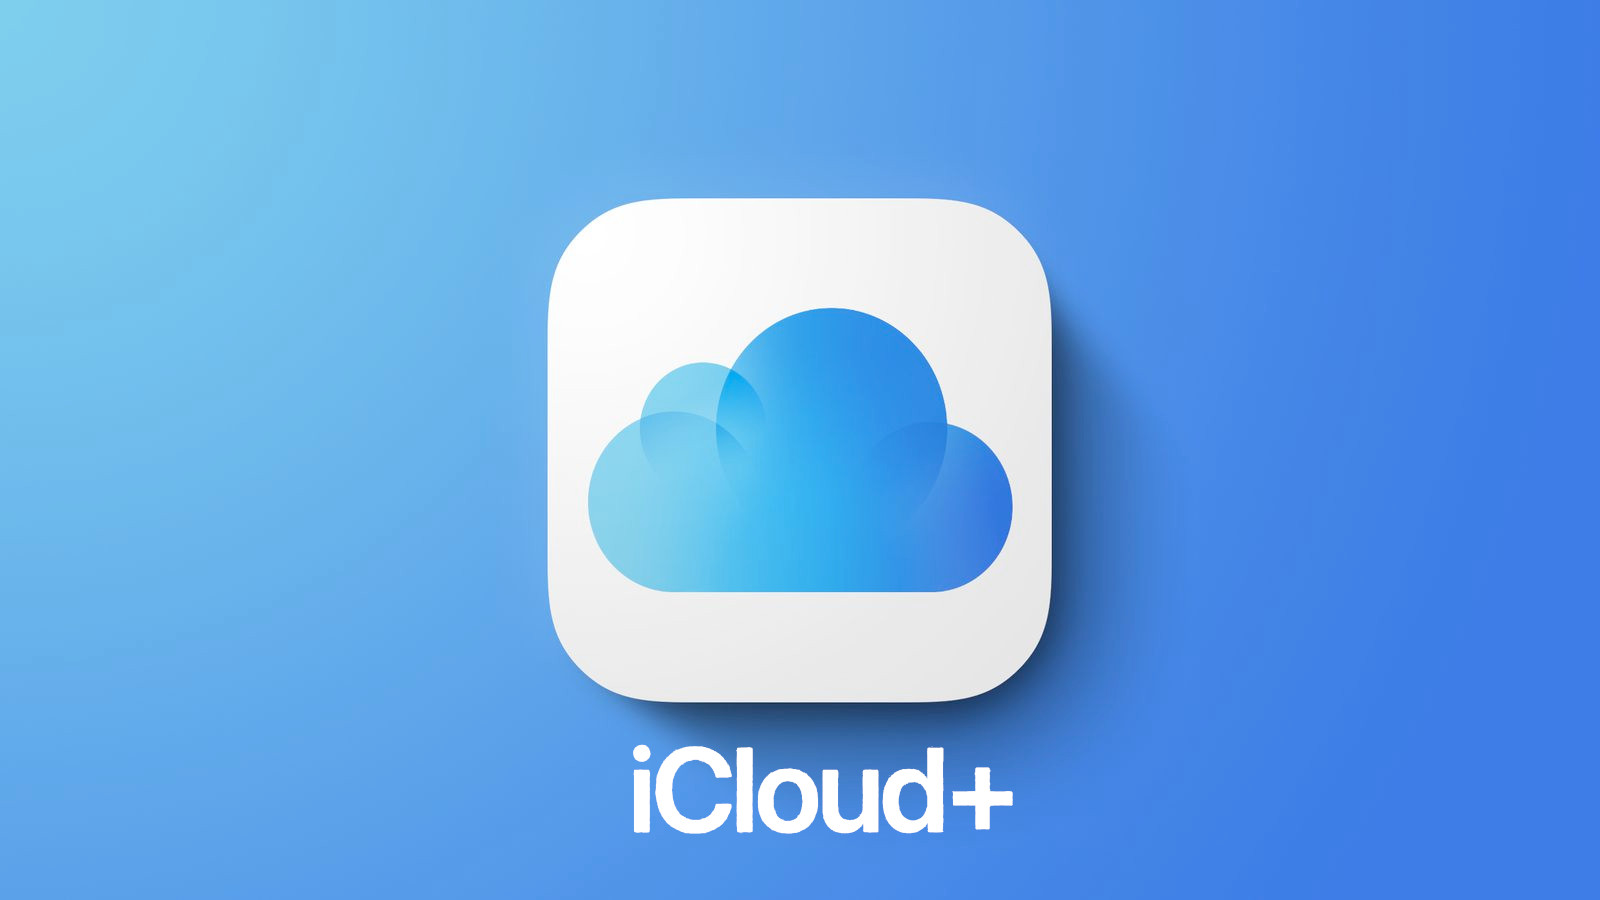 iCloud+ 50GB - 3 Months Trial Subscription US (ONLY FOR NEW ACCOUNTS), $0.31